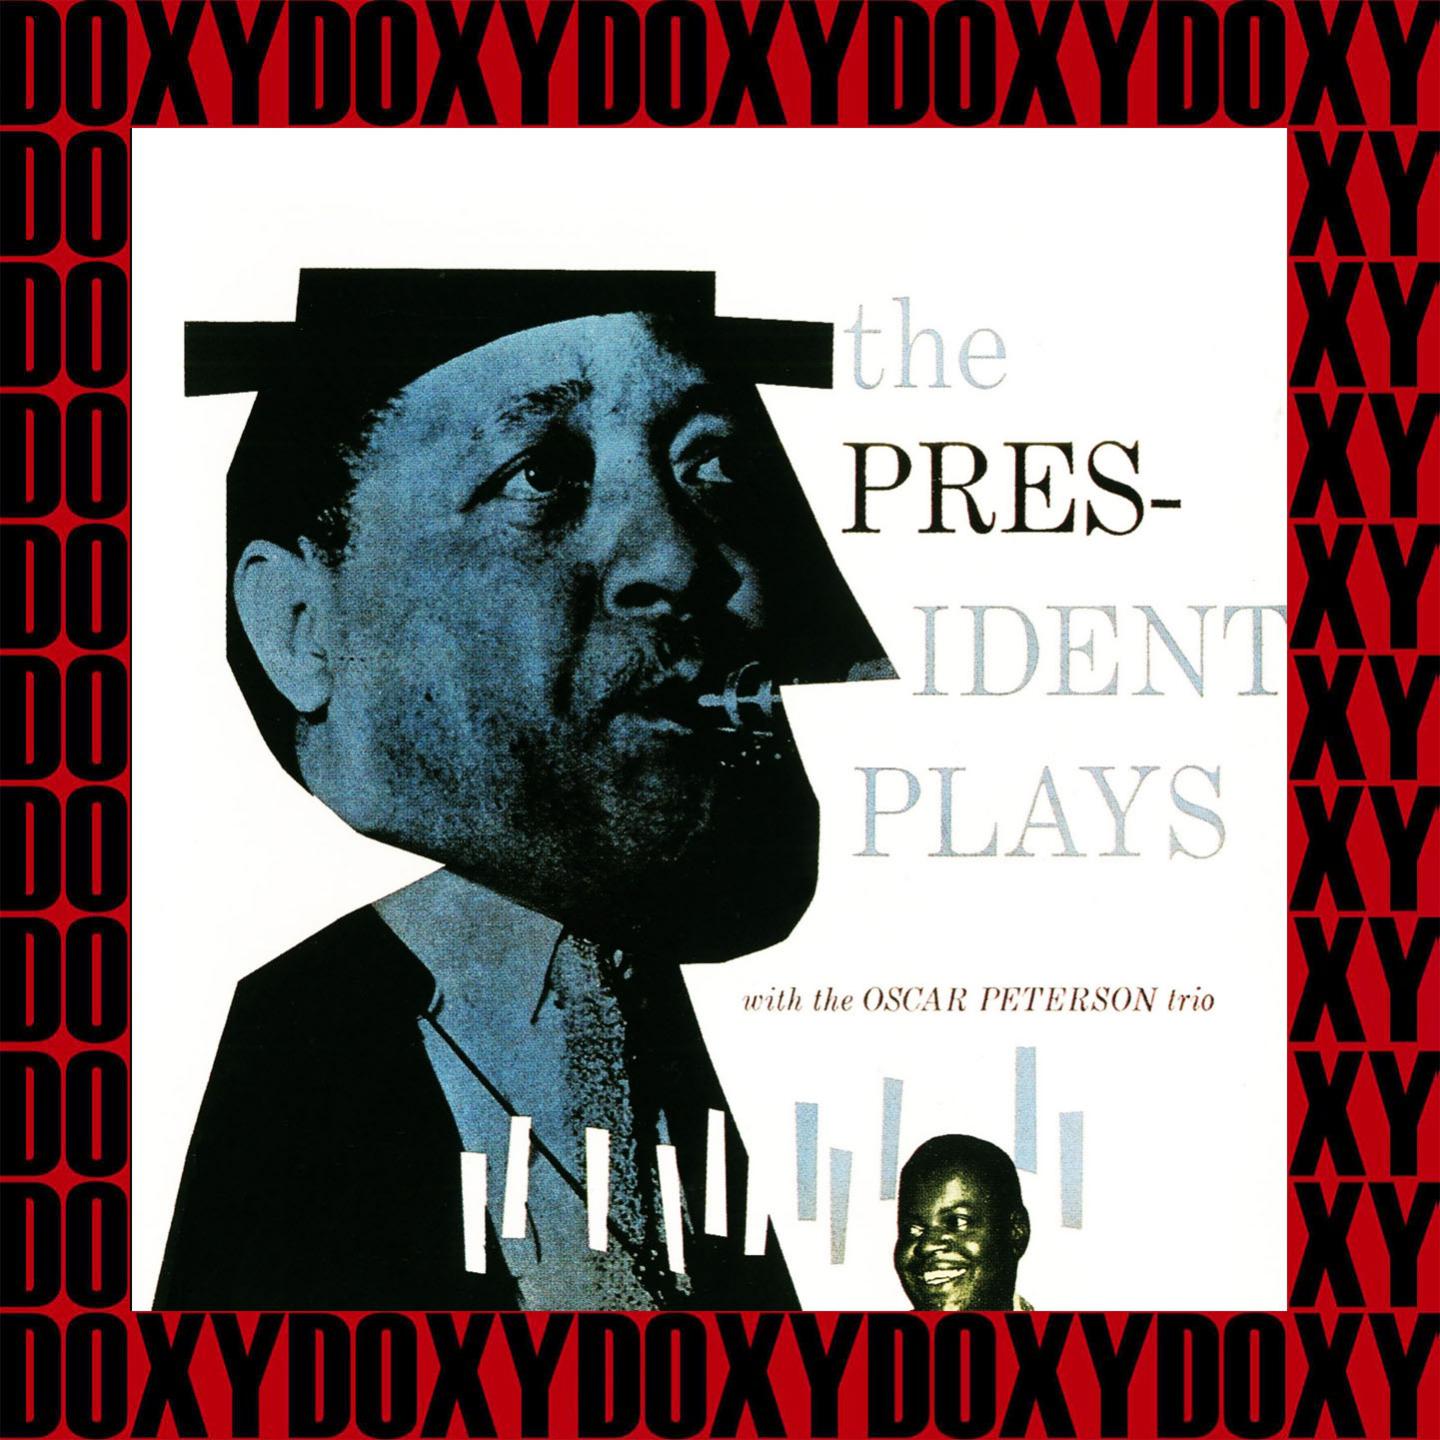 The President Plays With The Oscar Peterson Trio (Expanded, Remastered Version) (Doxy Collection)